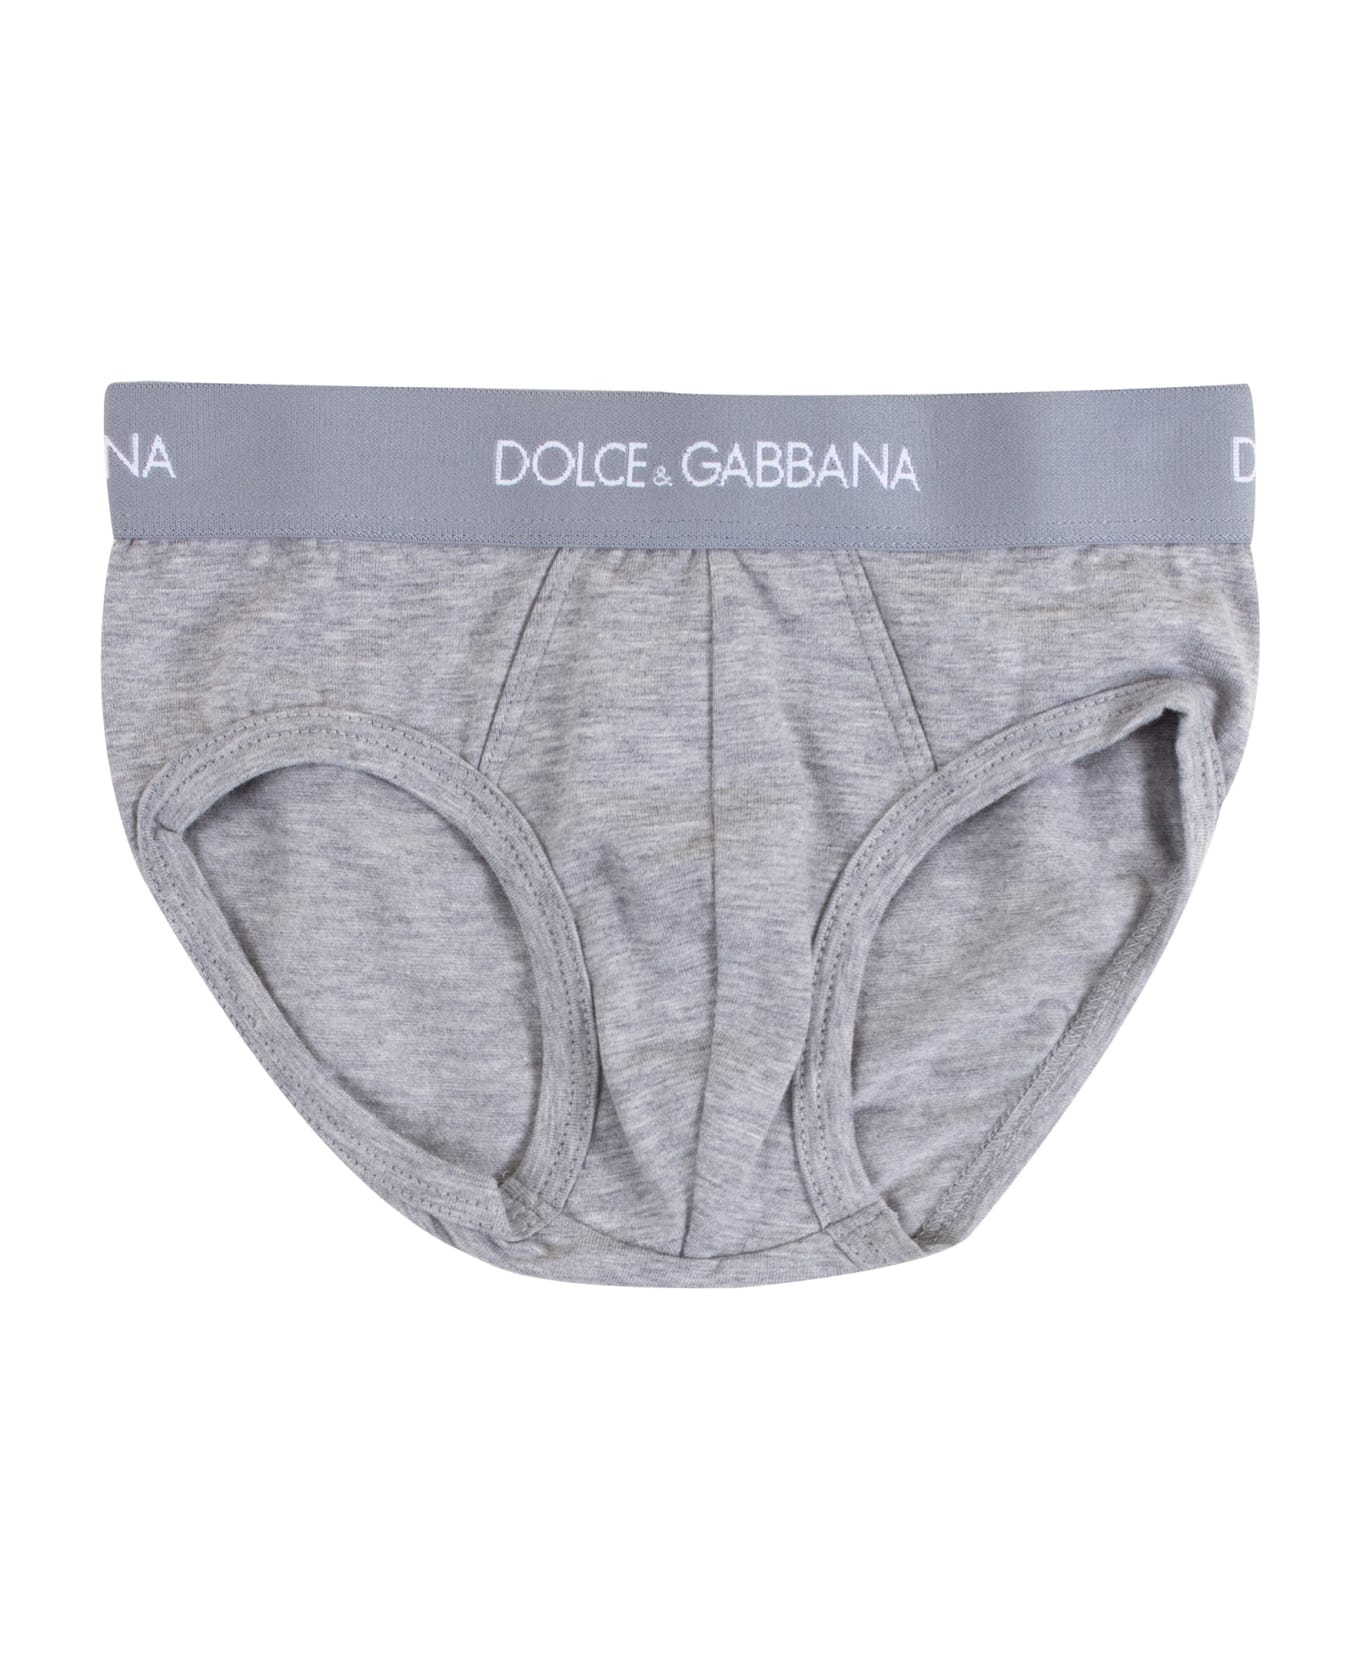 Dolce & Gabbana Baby Set Two Underpants - Gray